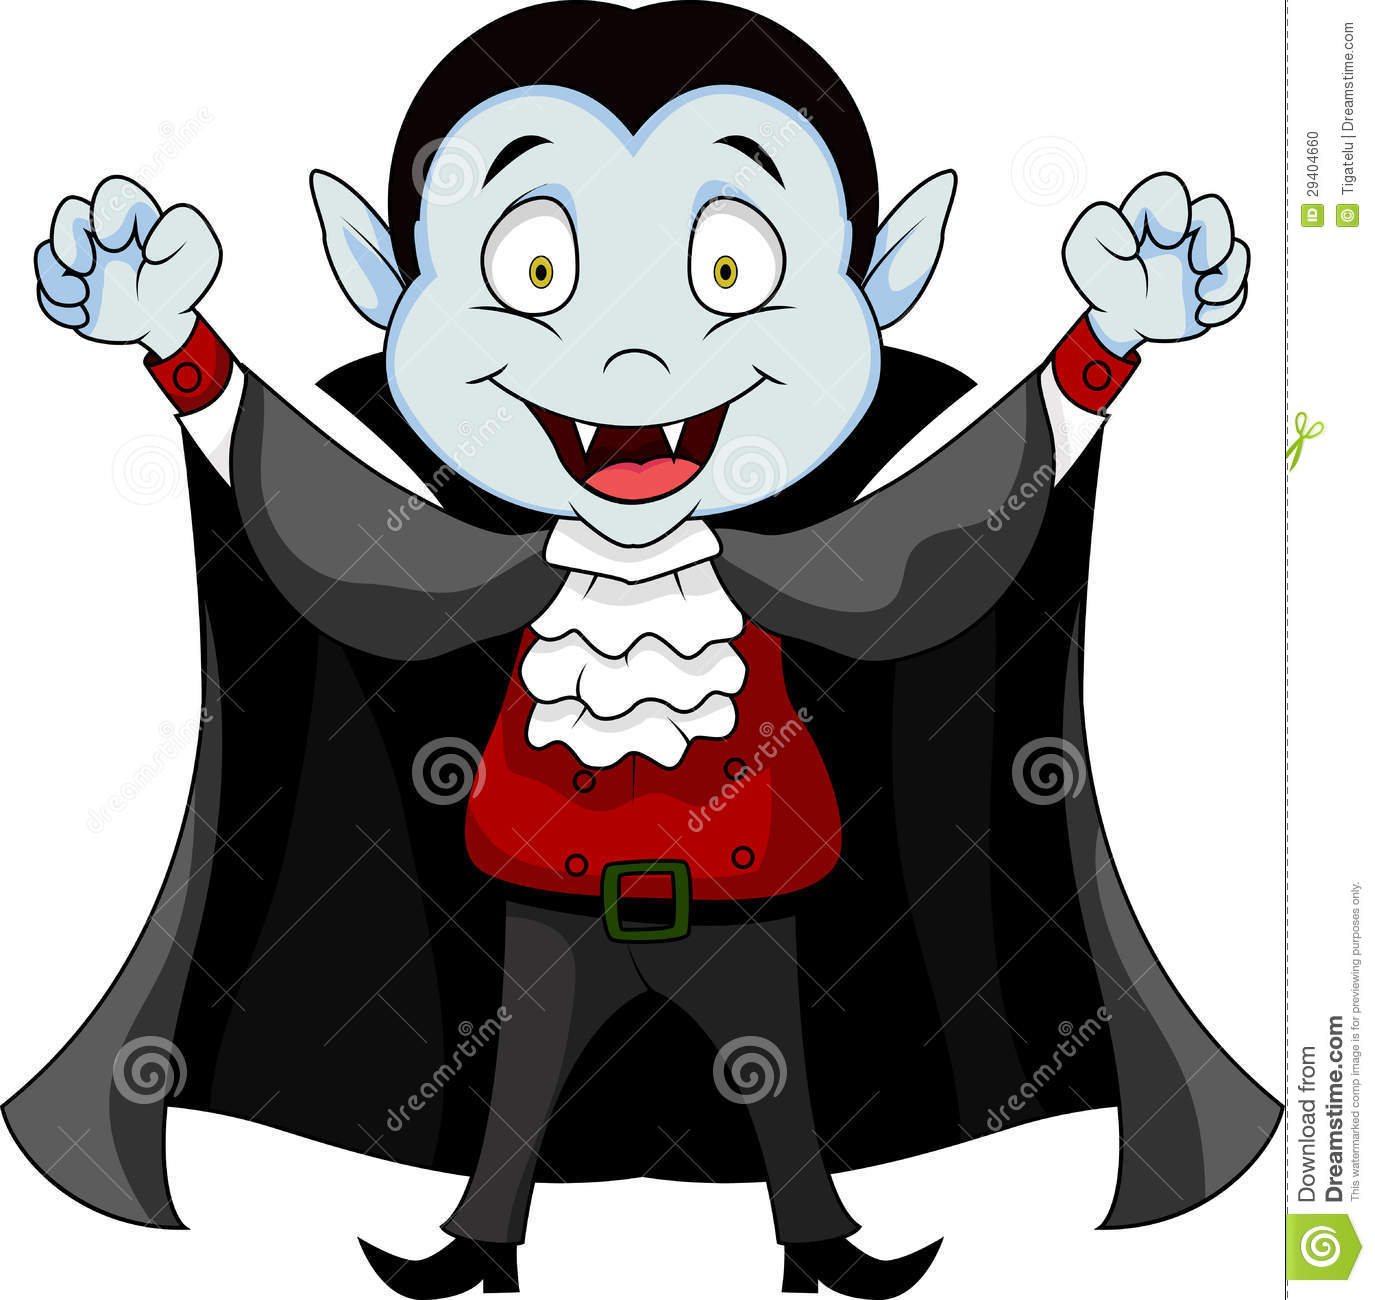 Art pictures free download. Vampire clipart cute